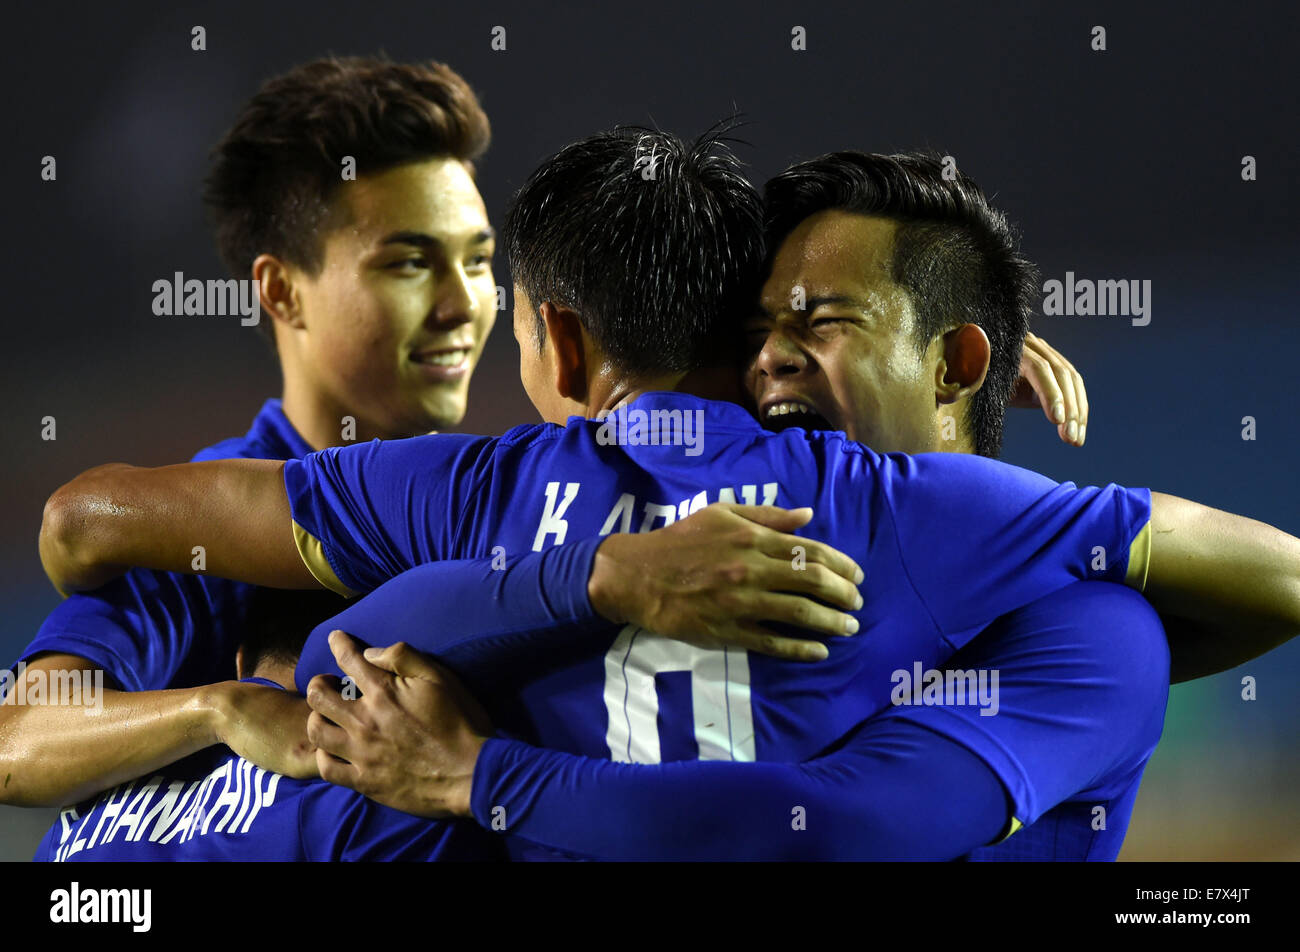 (140925) -- INCHEON, Sept. 25, 2014 (Xinhua) -- Players of Thailand celebrate goal during men's football round of 16 match against China at the 17th Asian Games in Incheon, South Korea, Sept. 25, 2014. China lost 0-2. (Xinhua/Lo Ping Fai)(mcg) Stock Photo